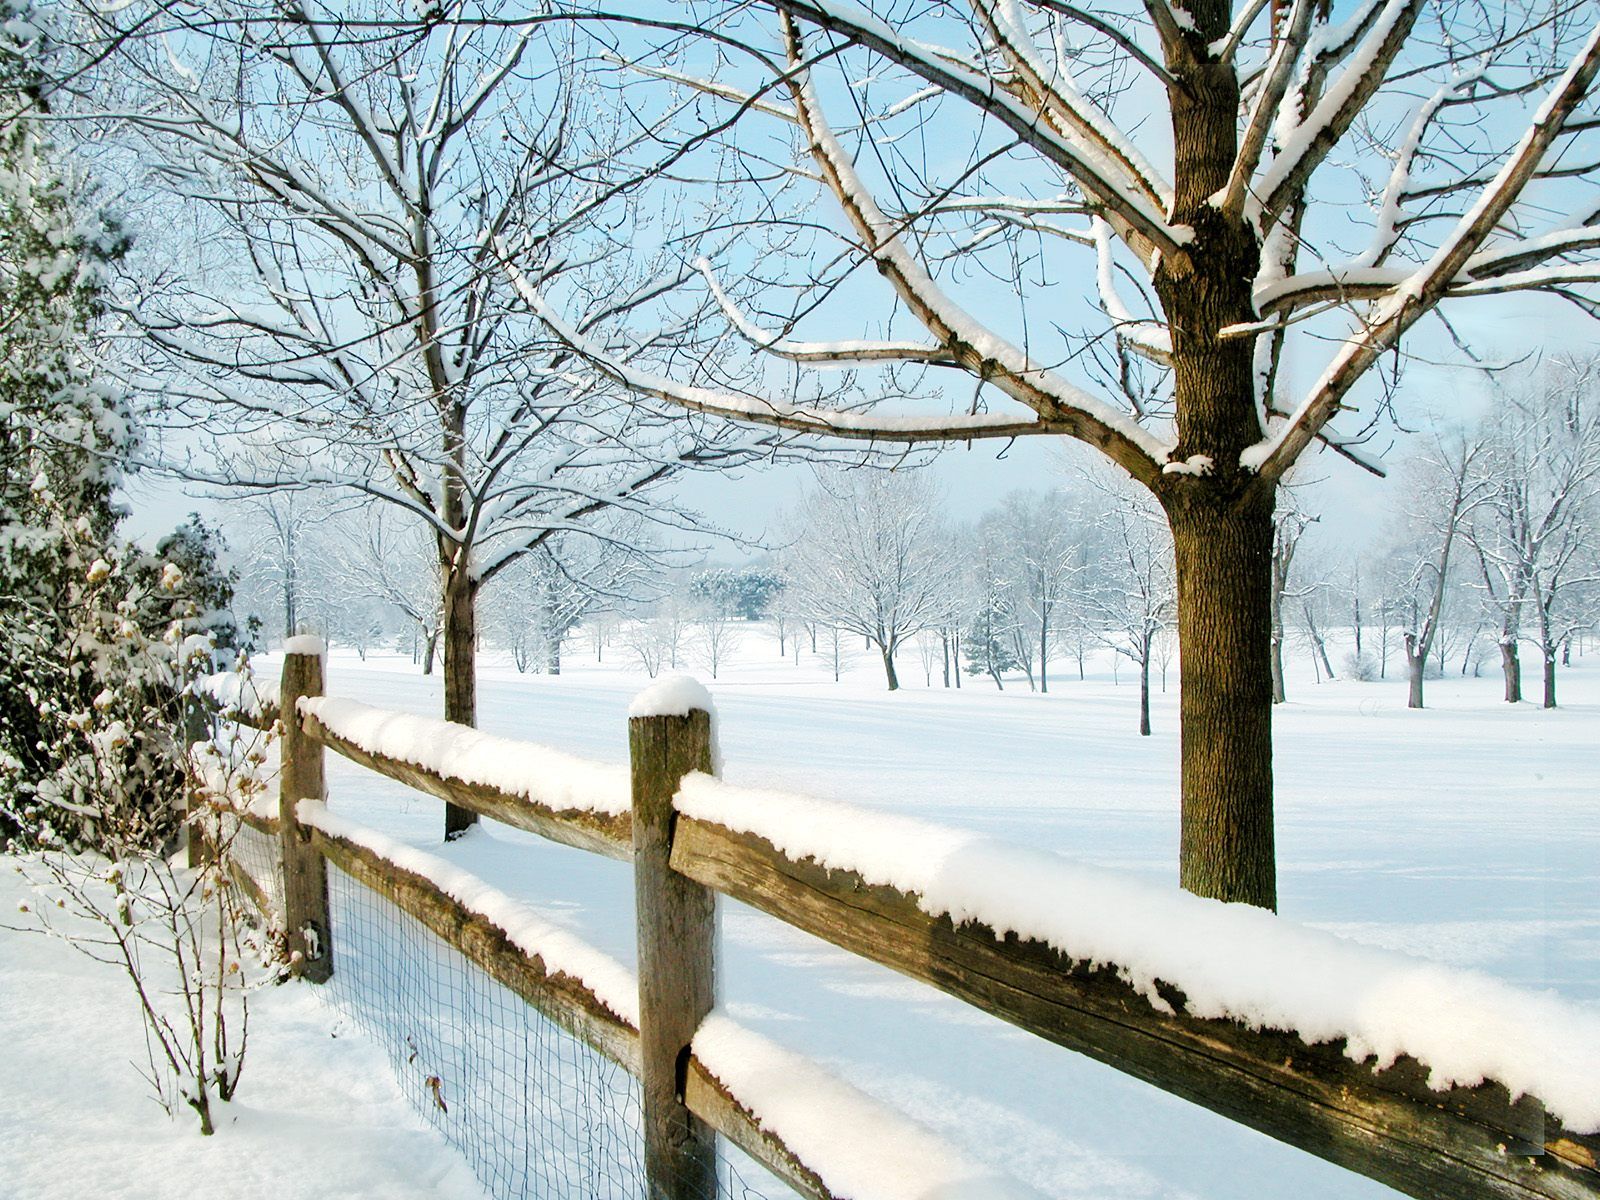 47+] Winter Country Scenes Wallpapers